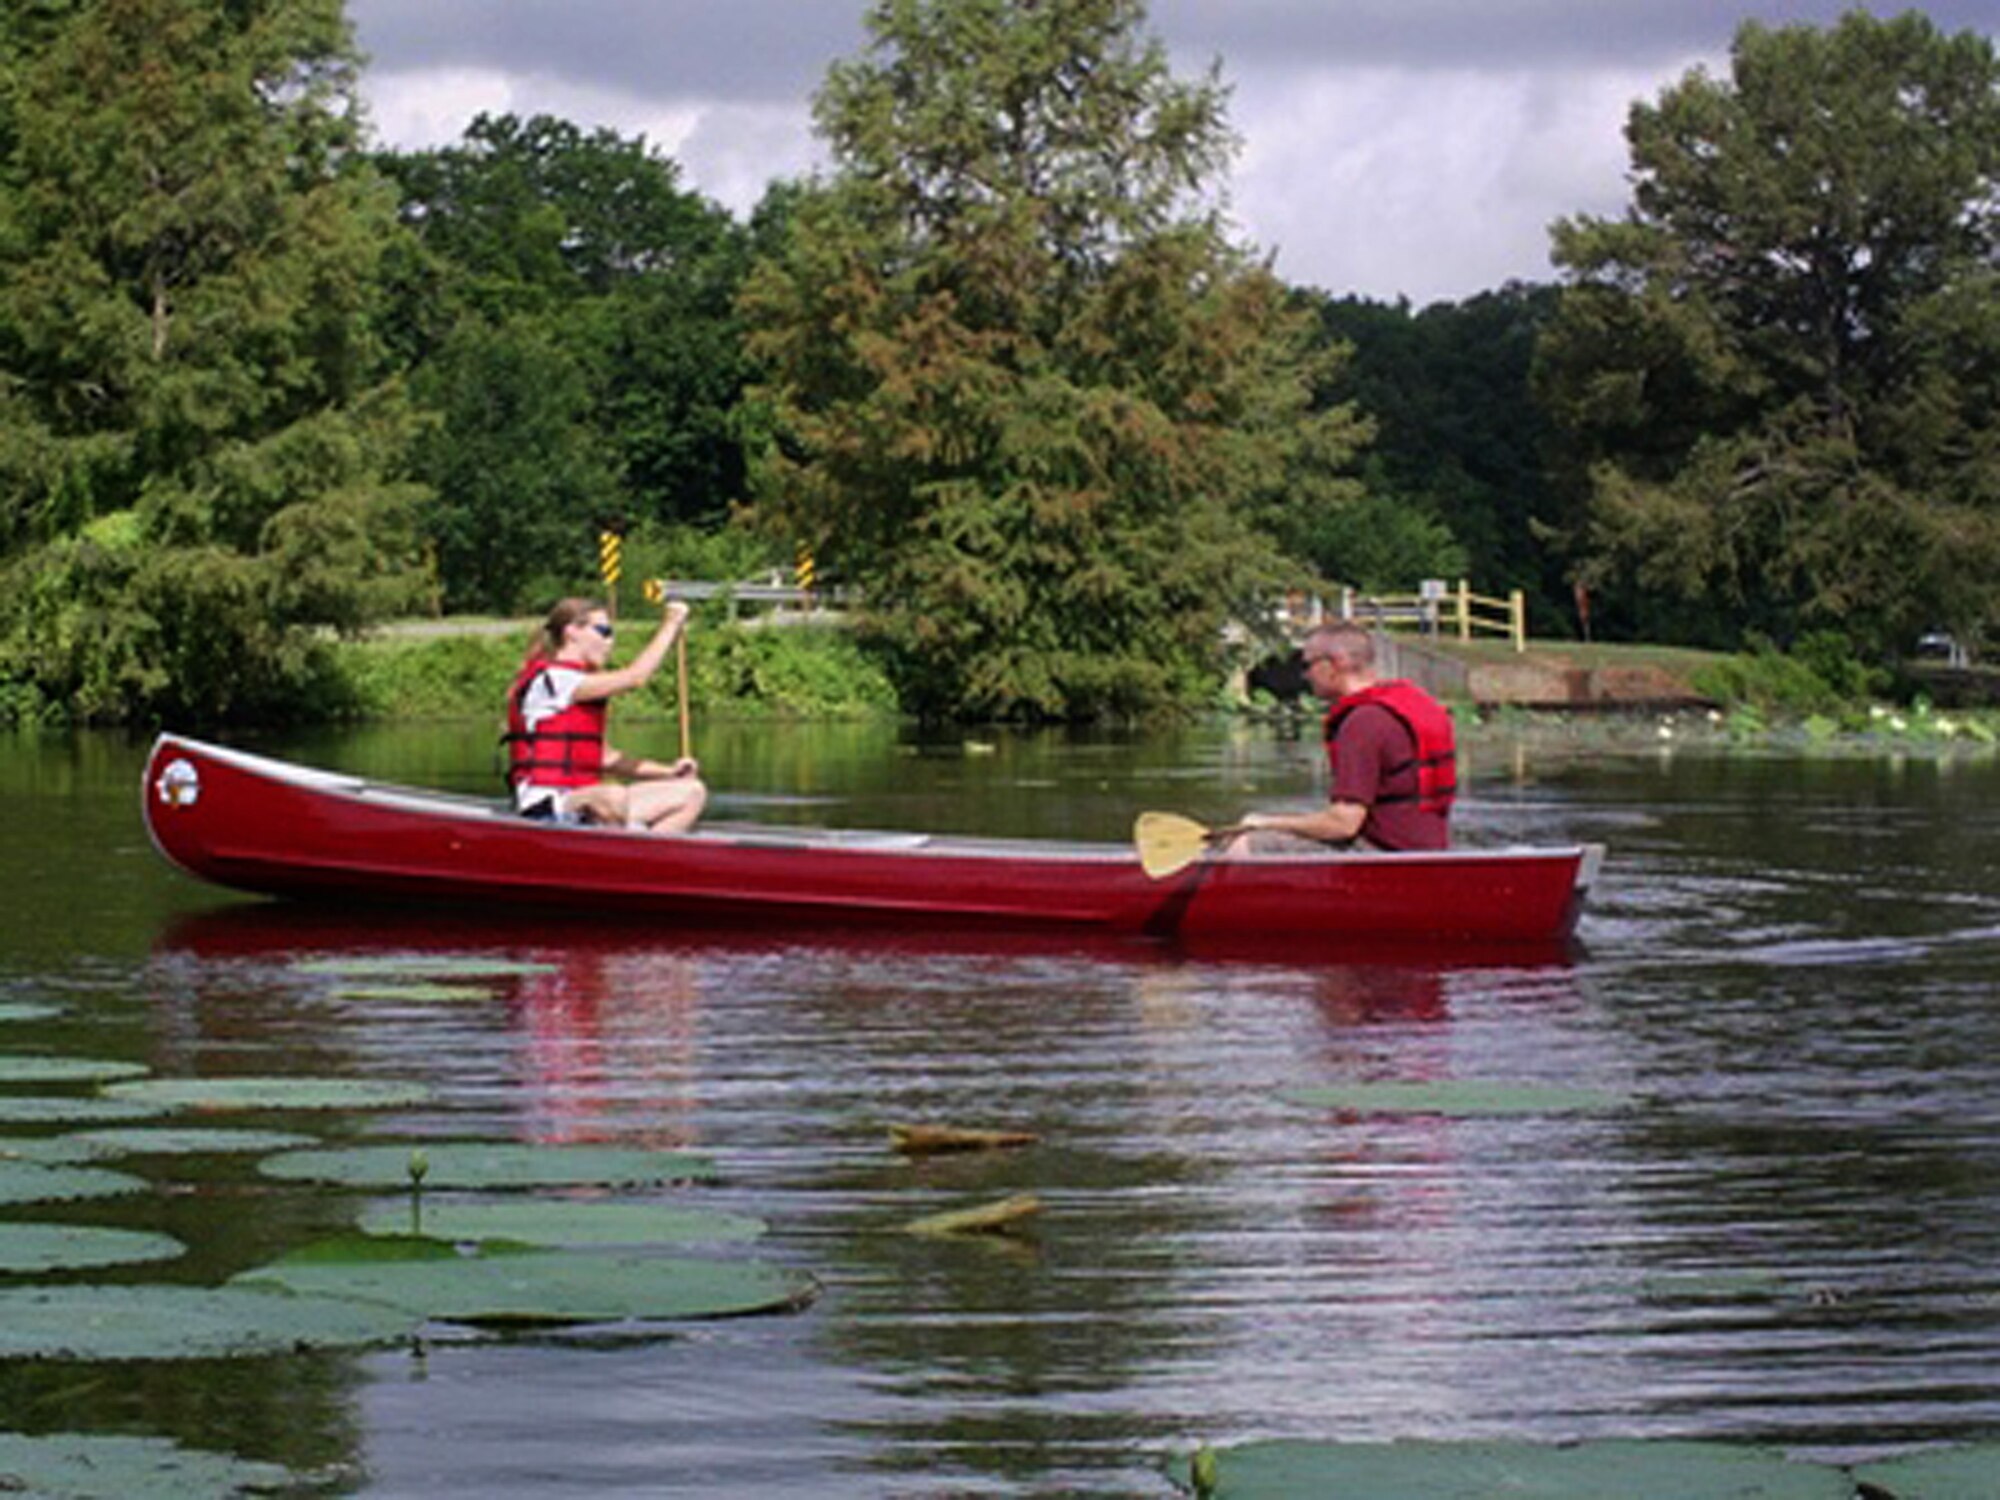 Barksdale team members canoe at Flag Lake on Barksdale Air Force Base, La. Outdoor Recreation has an abundance of equipment for rent to be used for recreational activities, such as camping and fishing equipment, boats, life jackets and party items. (Courtesy photo)(RELEASED)